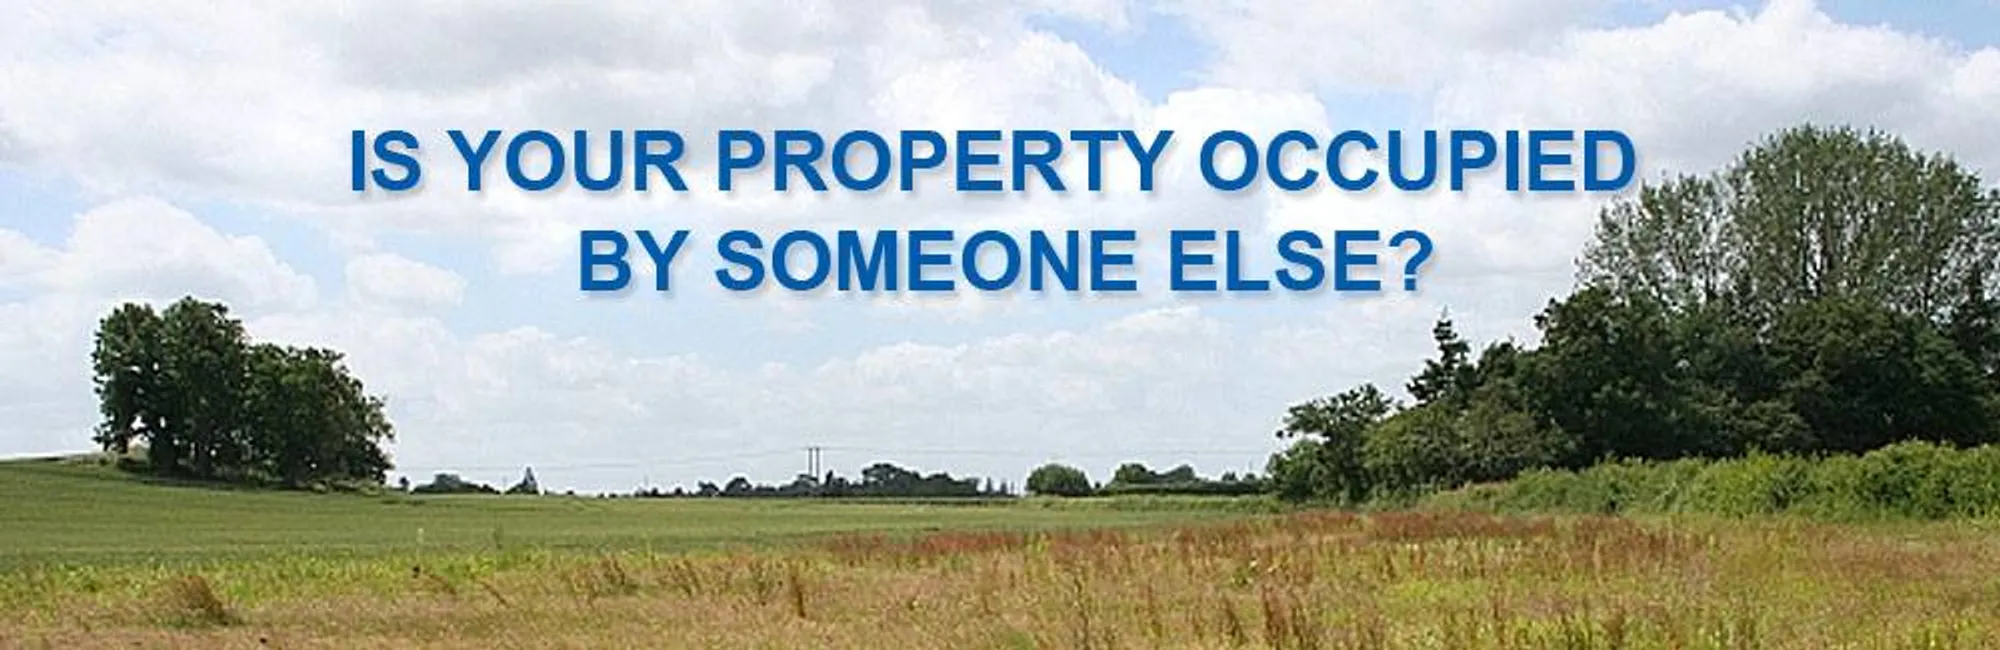 Are you facing an issue with the possession of property?